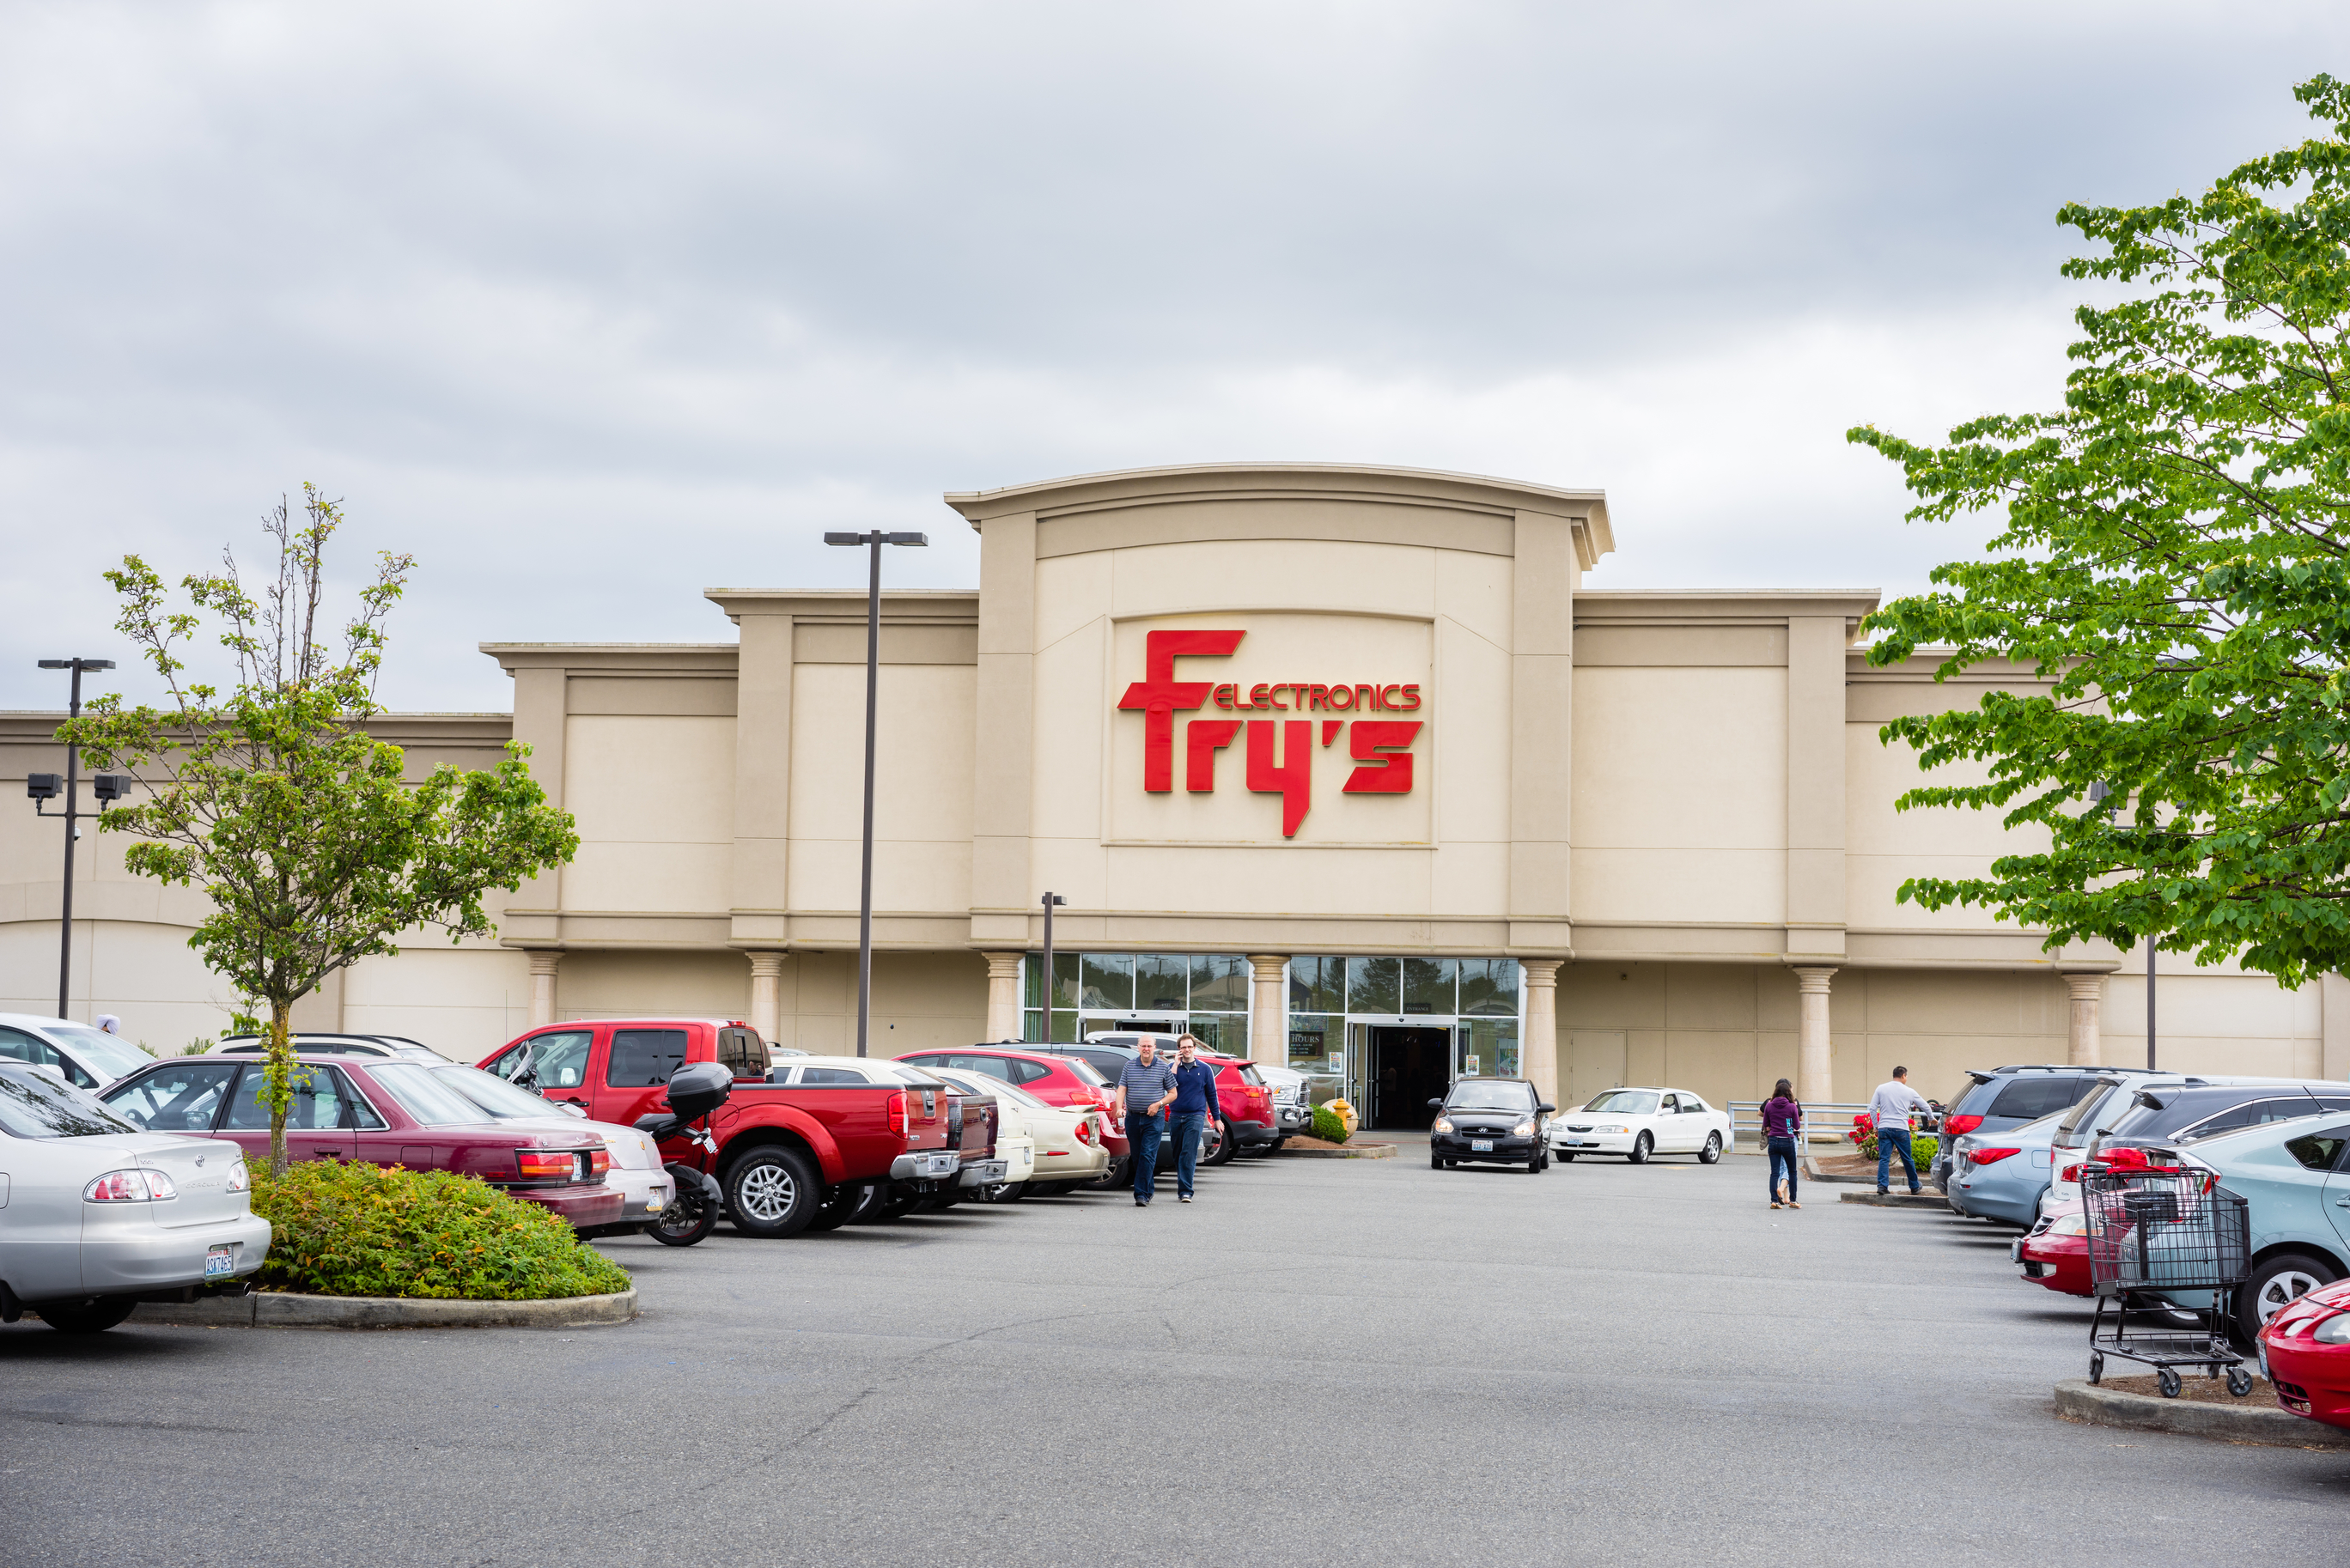 9 great Cyber Monday deals at Fry’s Electronics